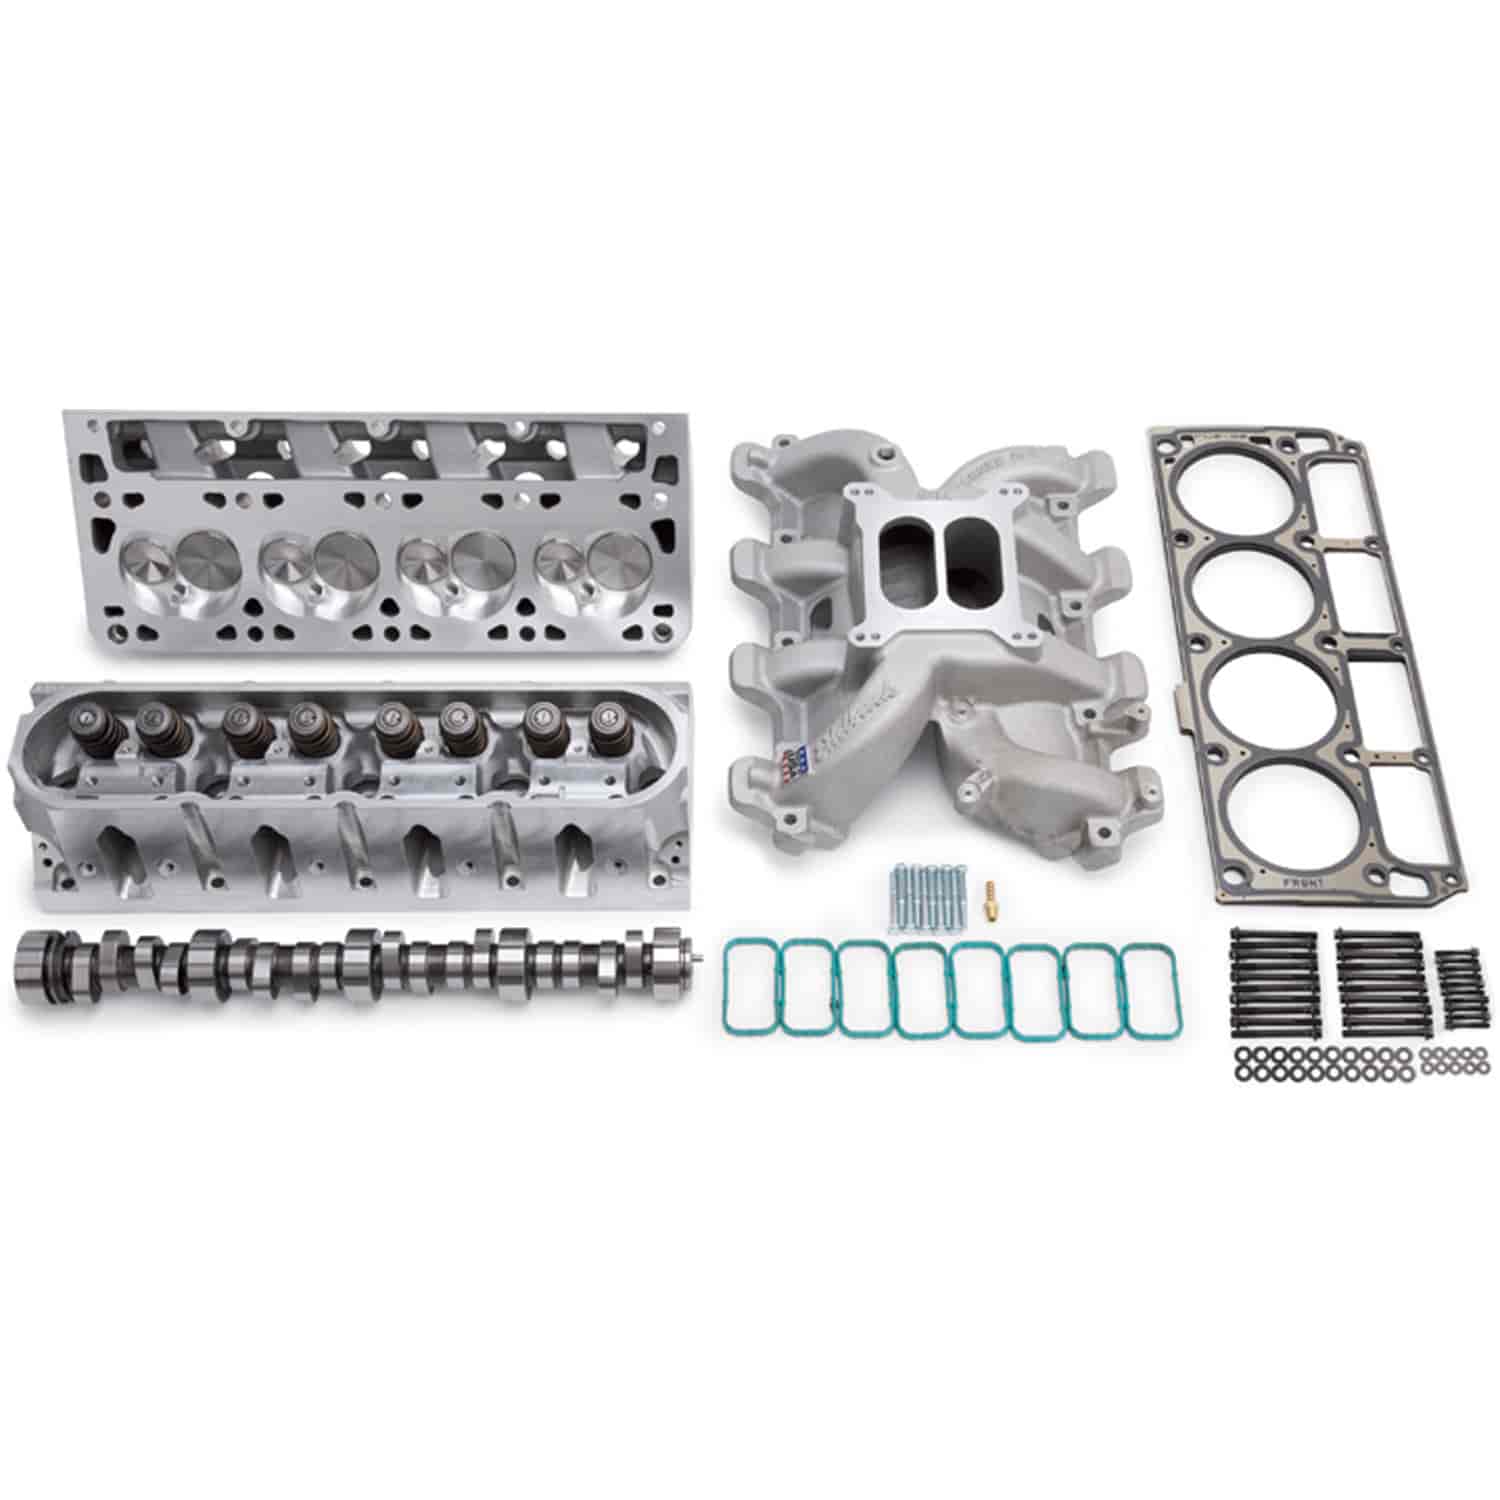 RPM Power Package Top End Kit 2004-Later 6.0L LS2